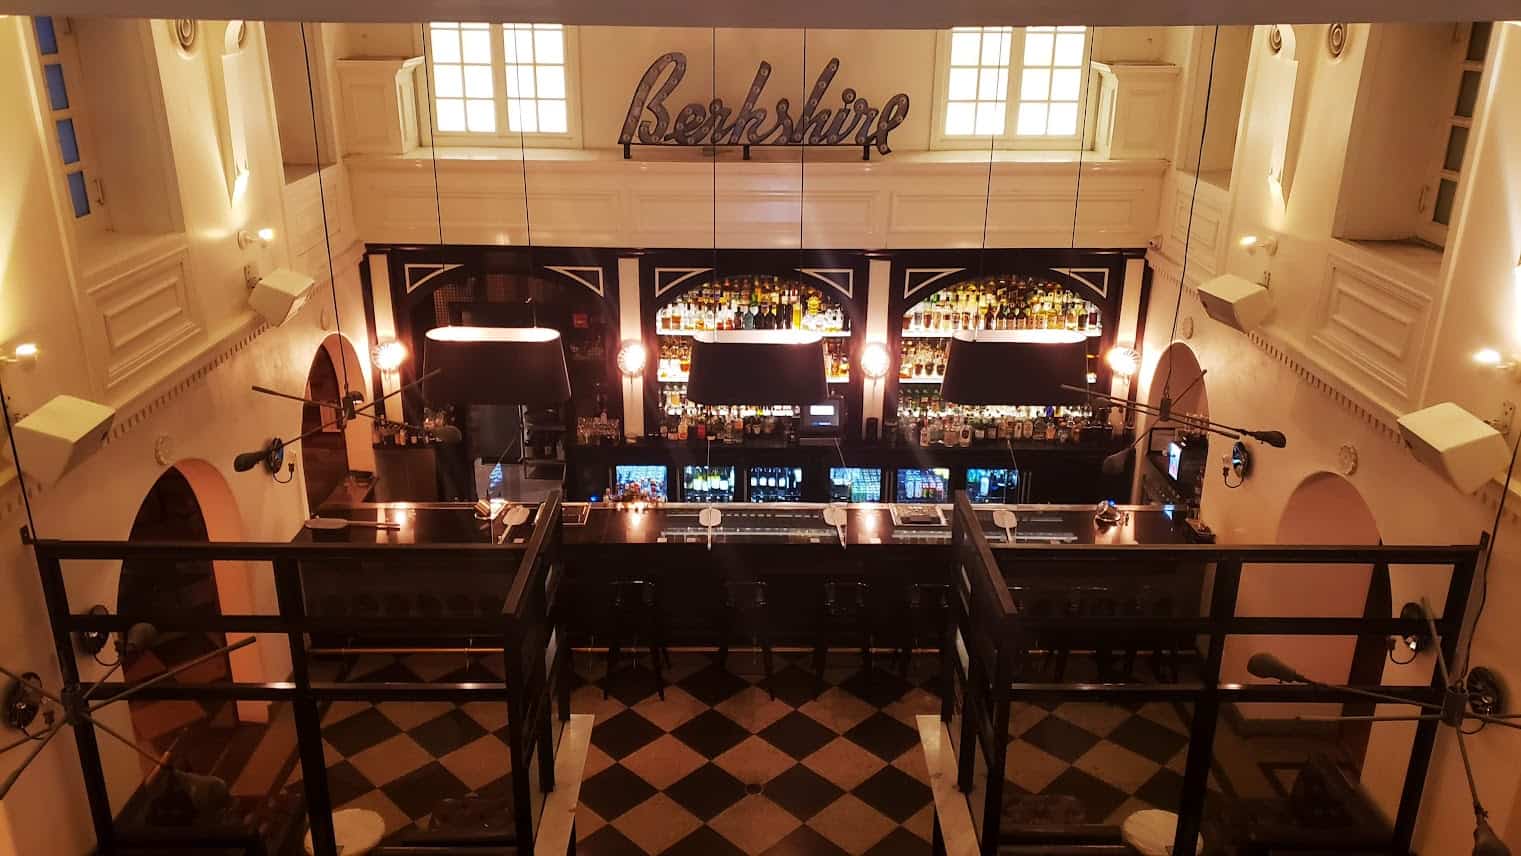 A view from the balcony into The Berkshire Room bar at the Acme Hotel in Chicago